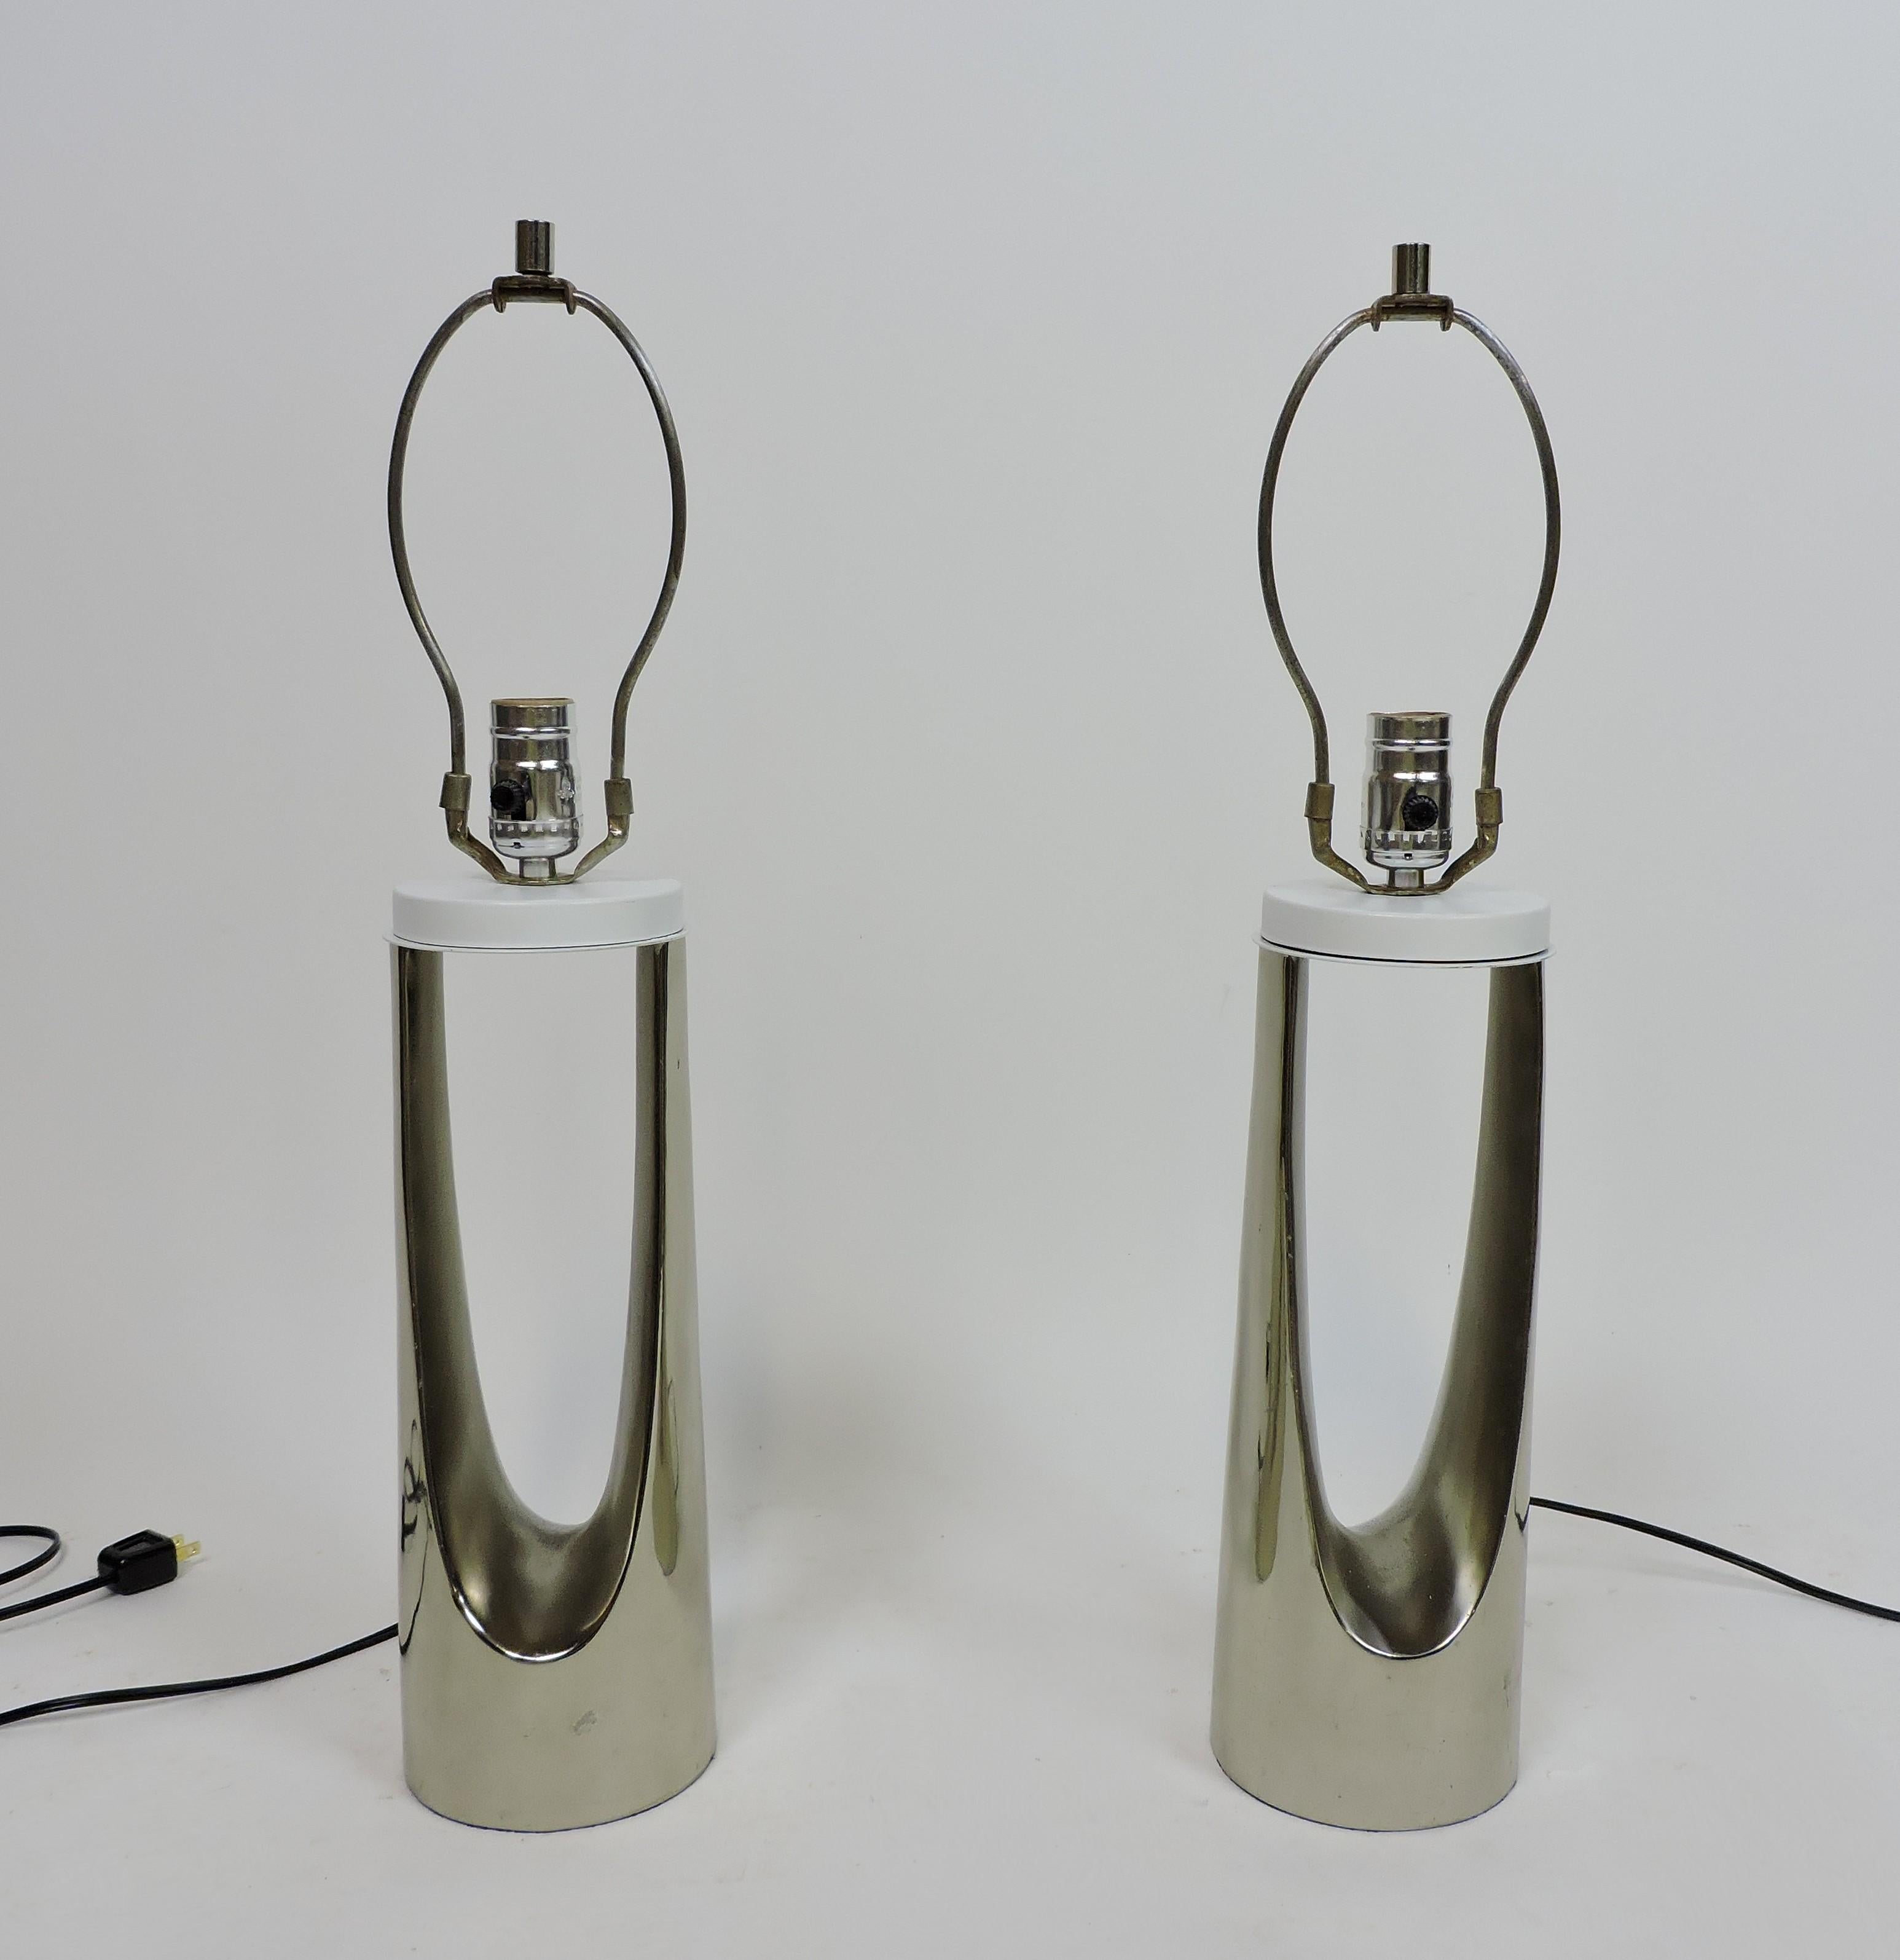 Painted Laurel Lamp Co. Mid-Century Modern Wishbone Hairpin Chrome Table Lamps